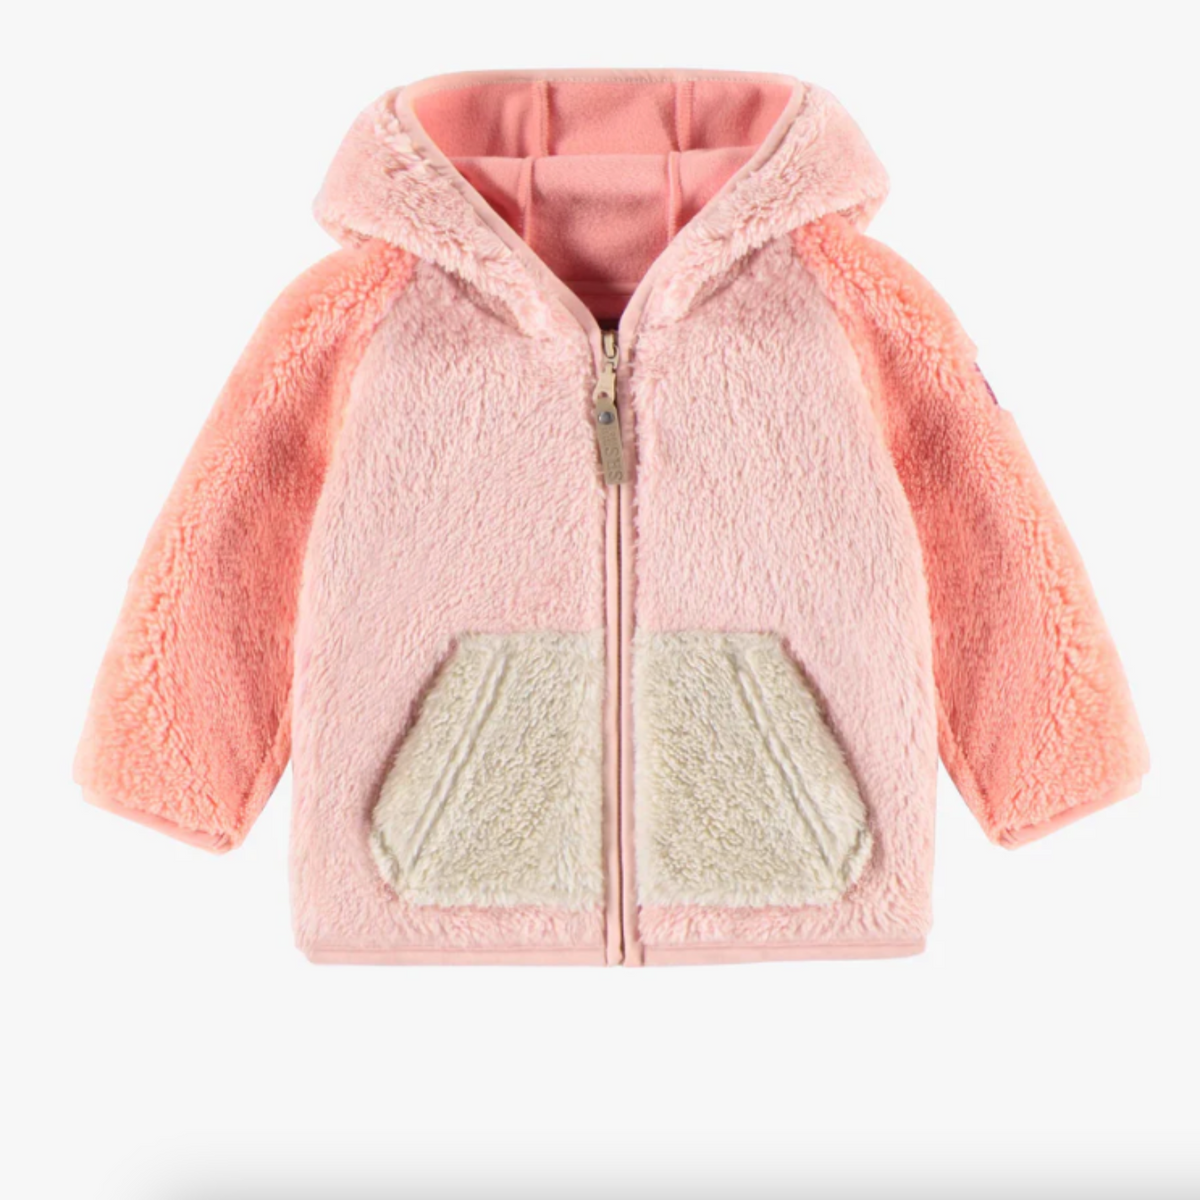 Pink Sherpa Jacket with Hood, Baby